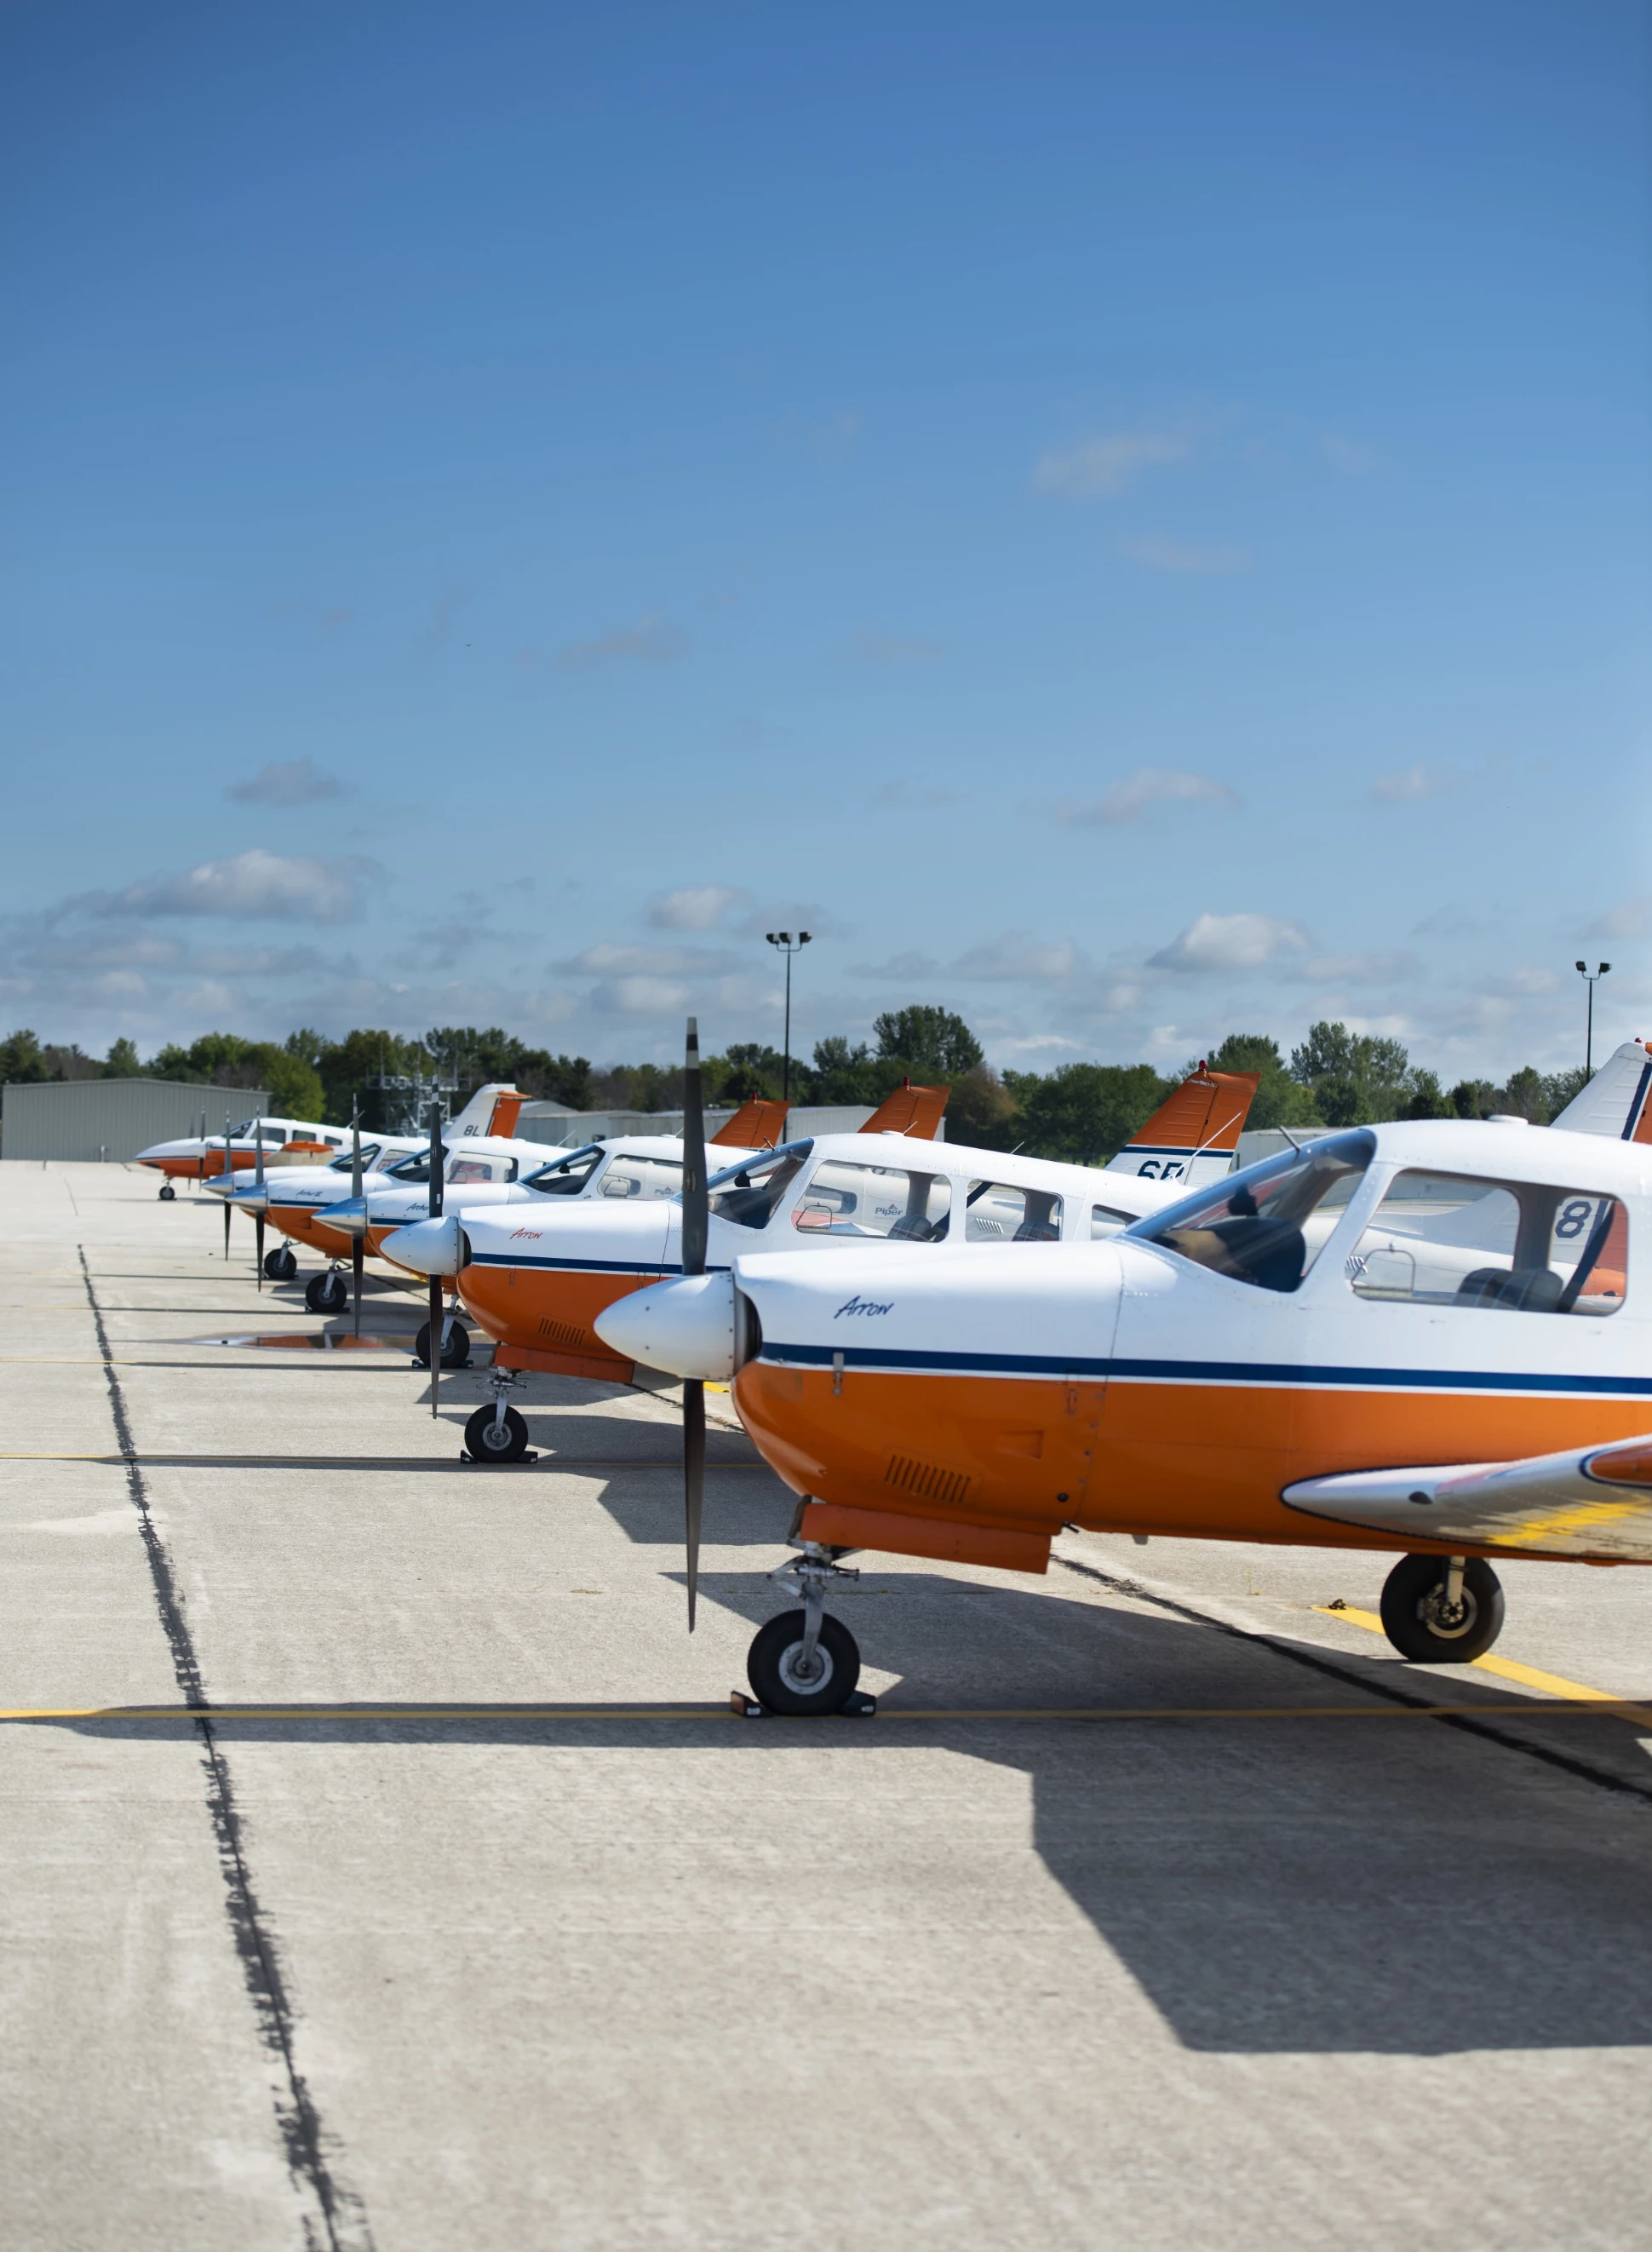 A lineup of small aircraft on a runway.